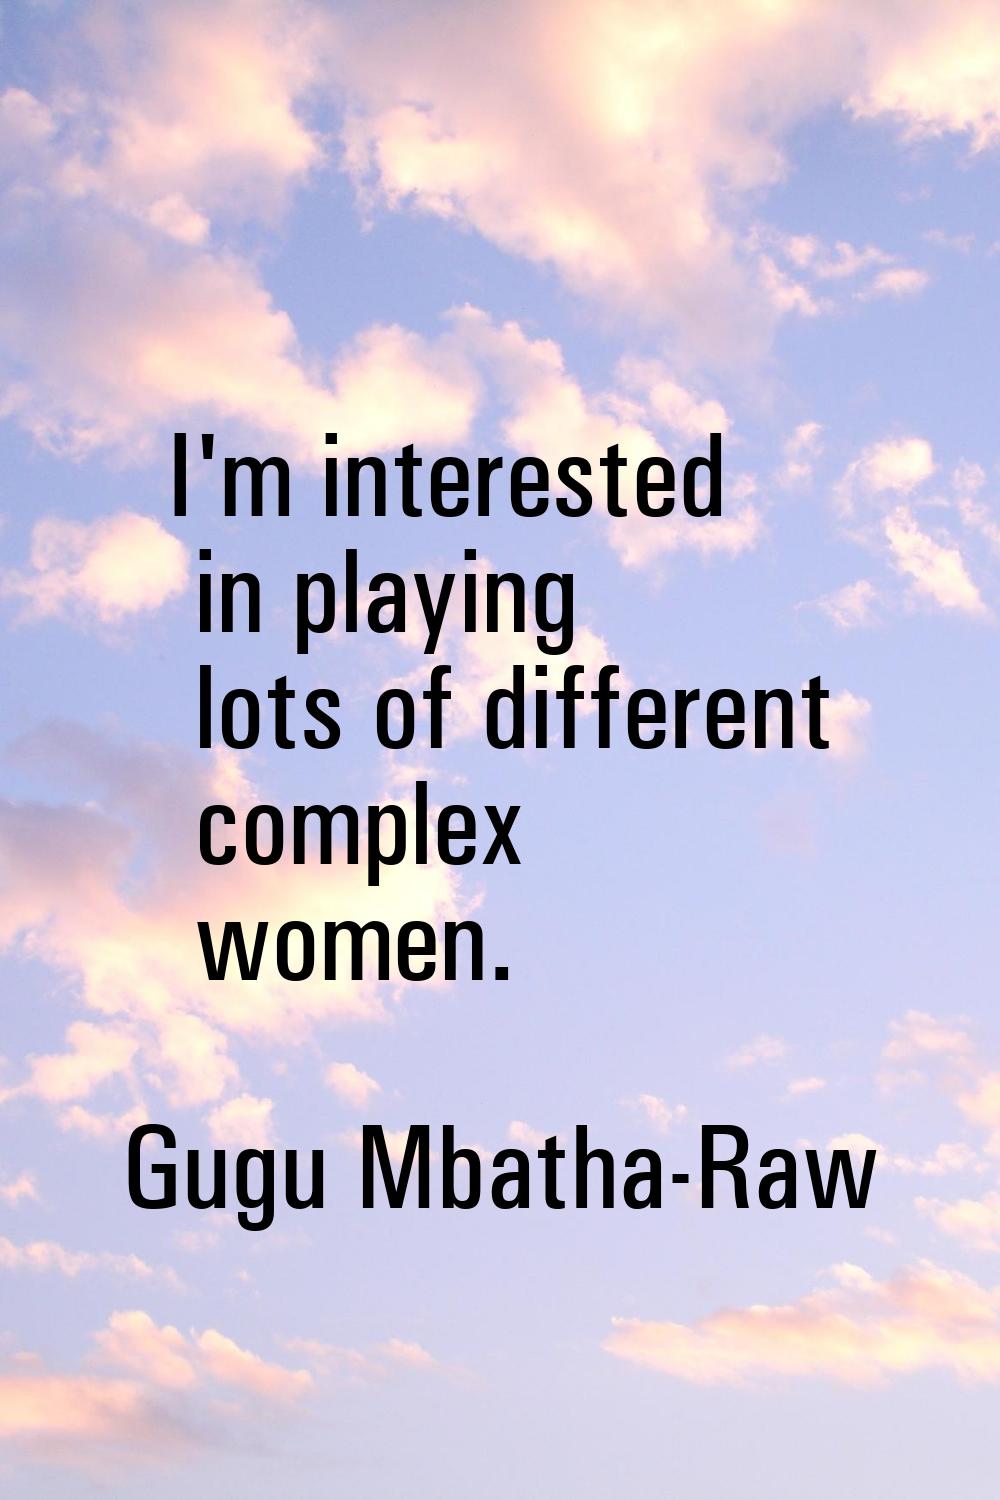 I'm interested in playing lots of different complex women.